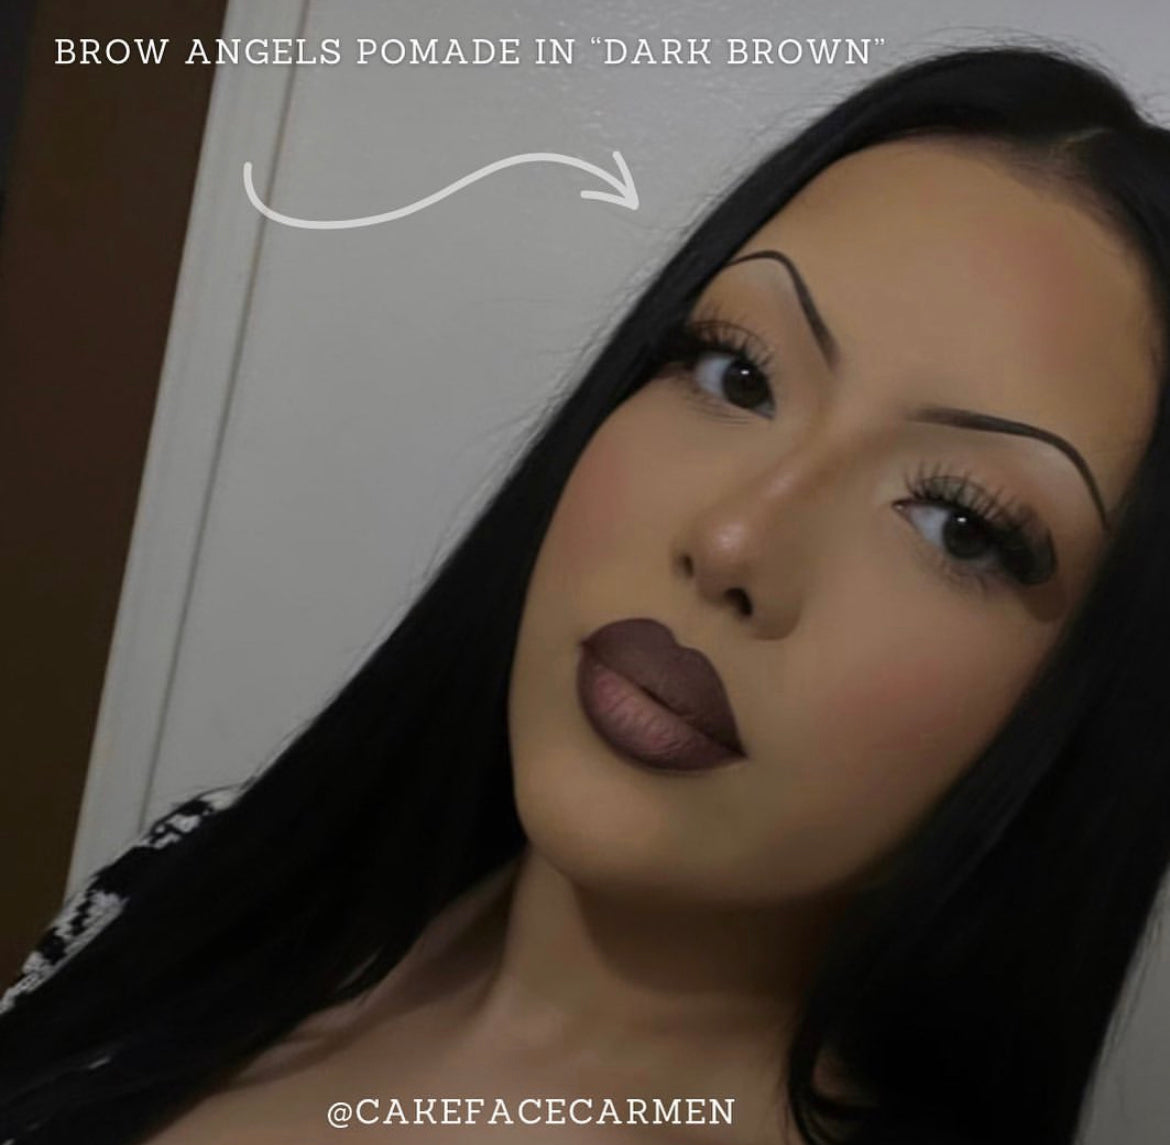 Brow Angels Pomade